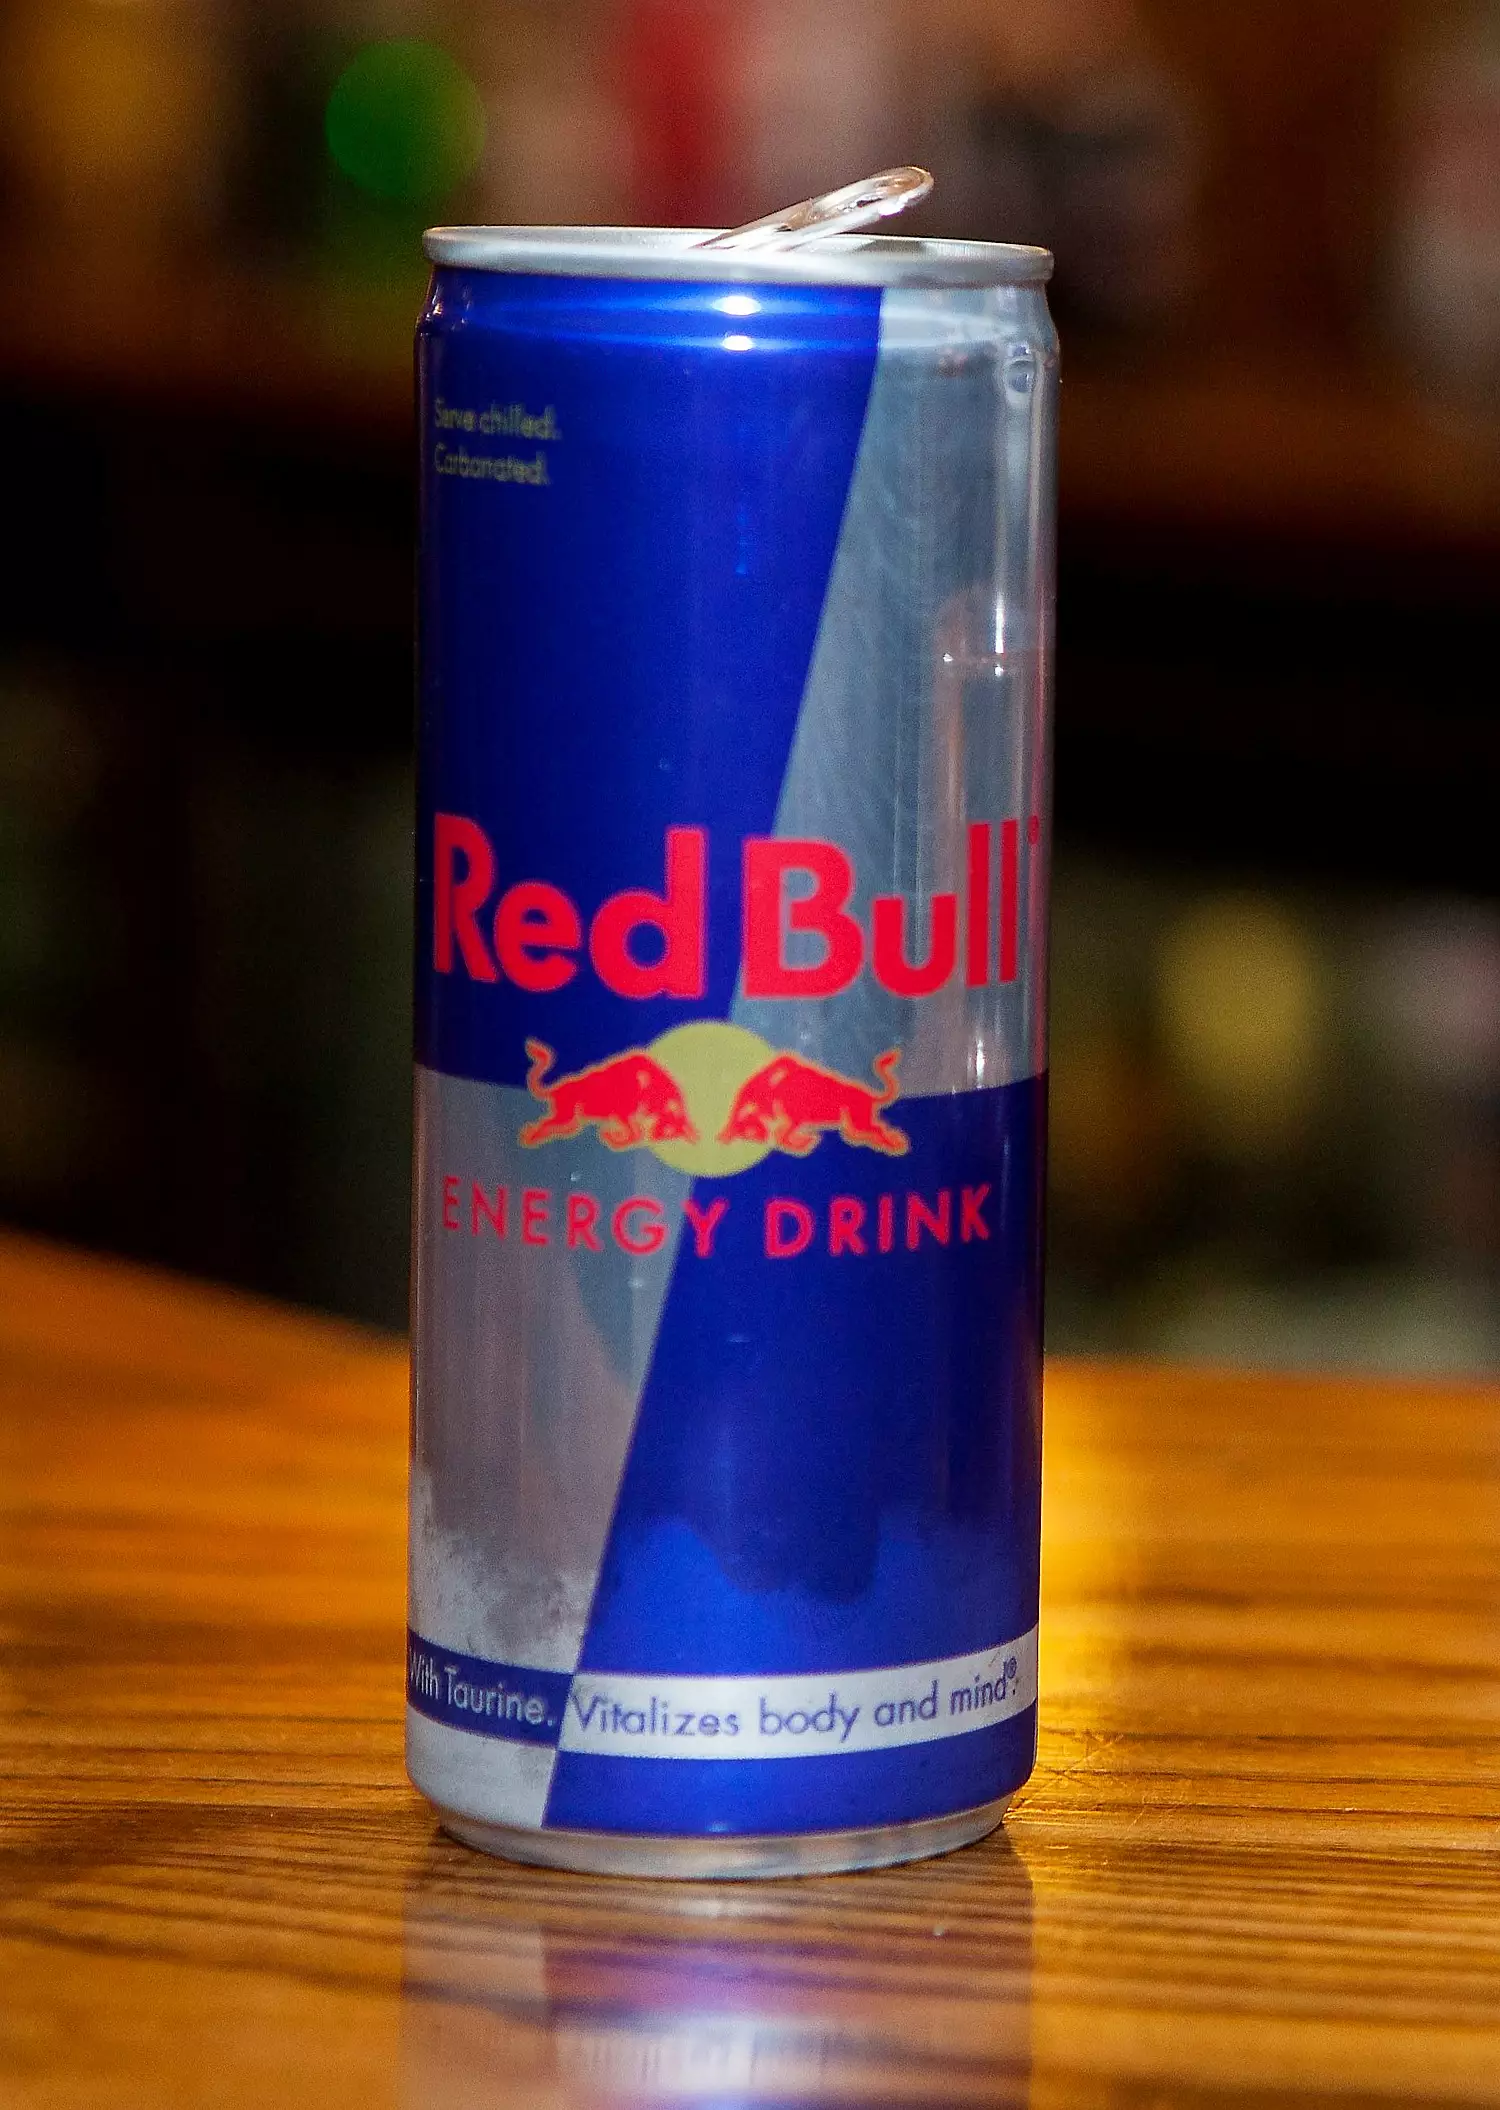 The drama unfolded because the club didn't sell Red Bull.